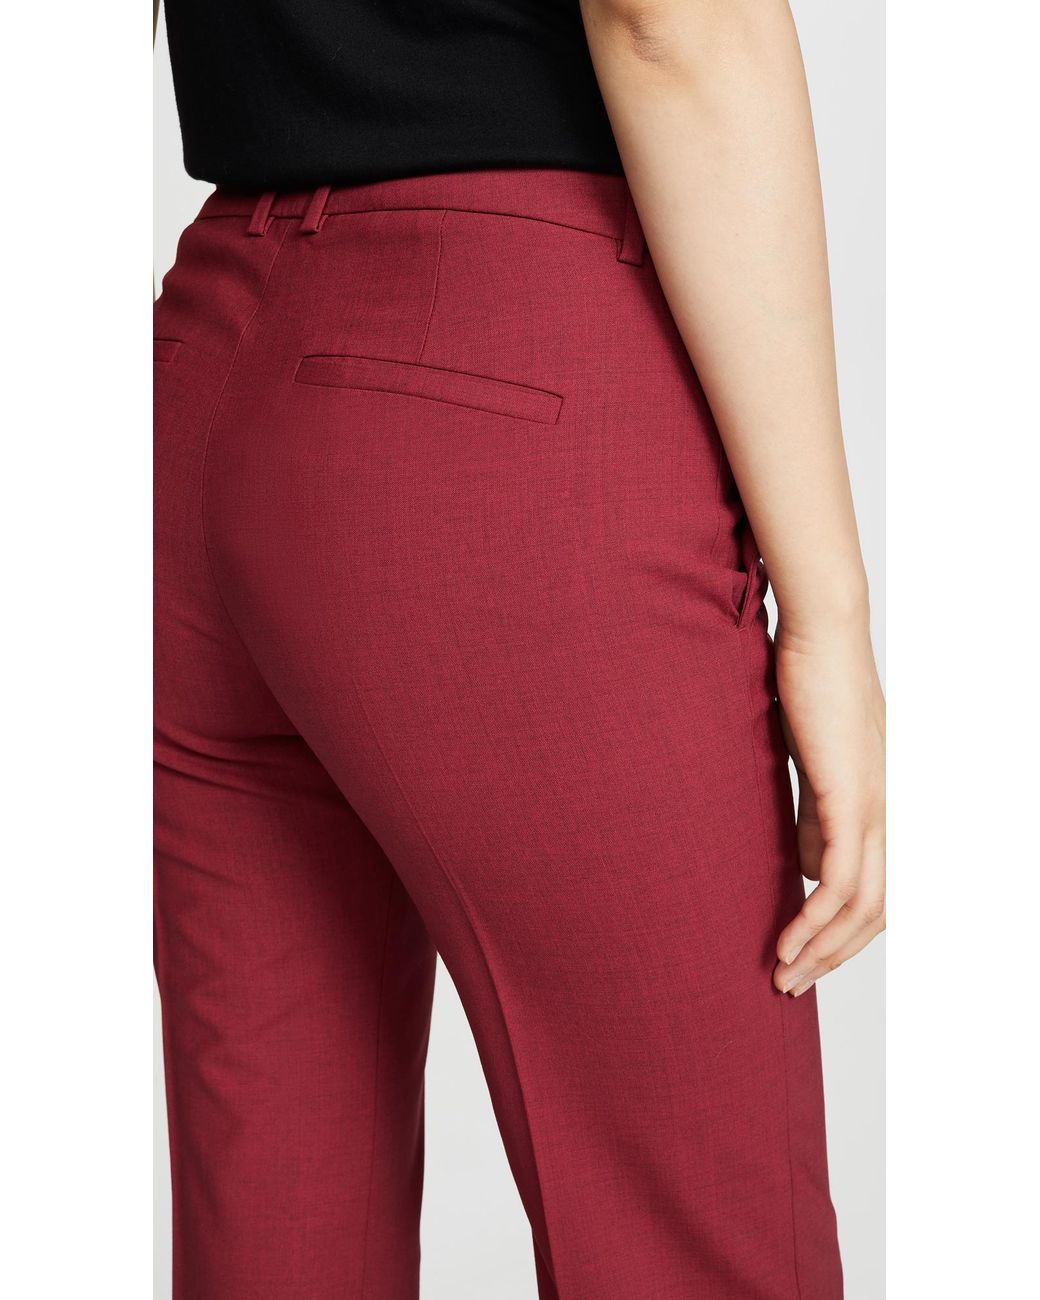 Theory Demitria 2 Pants in Red